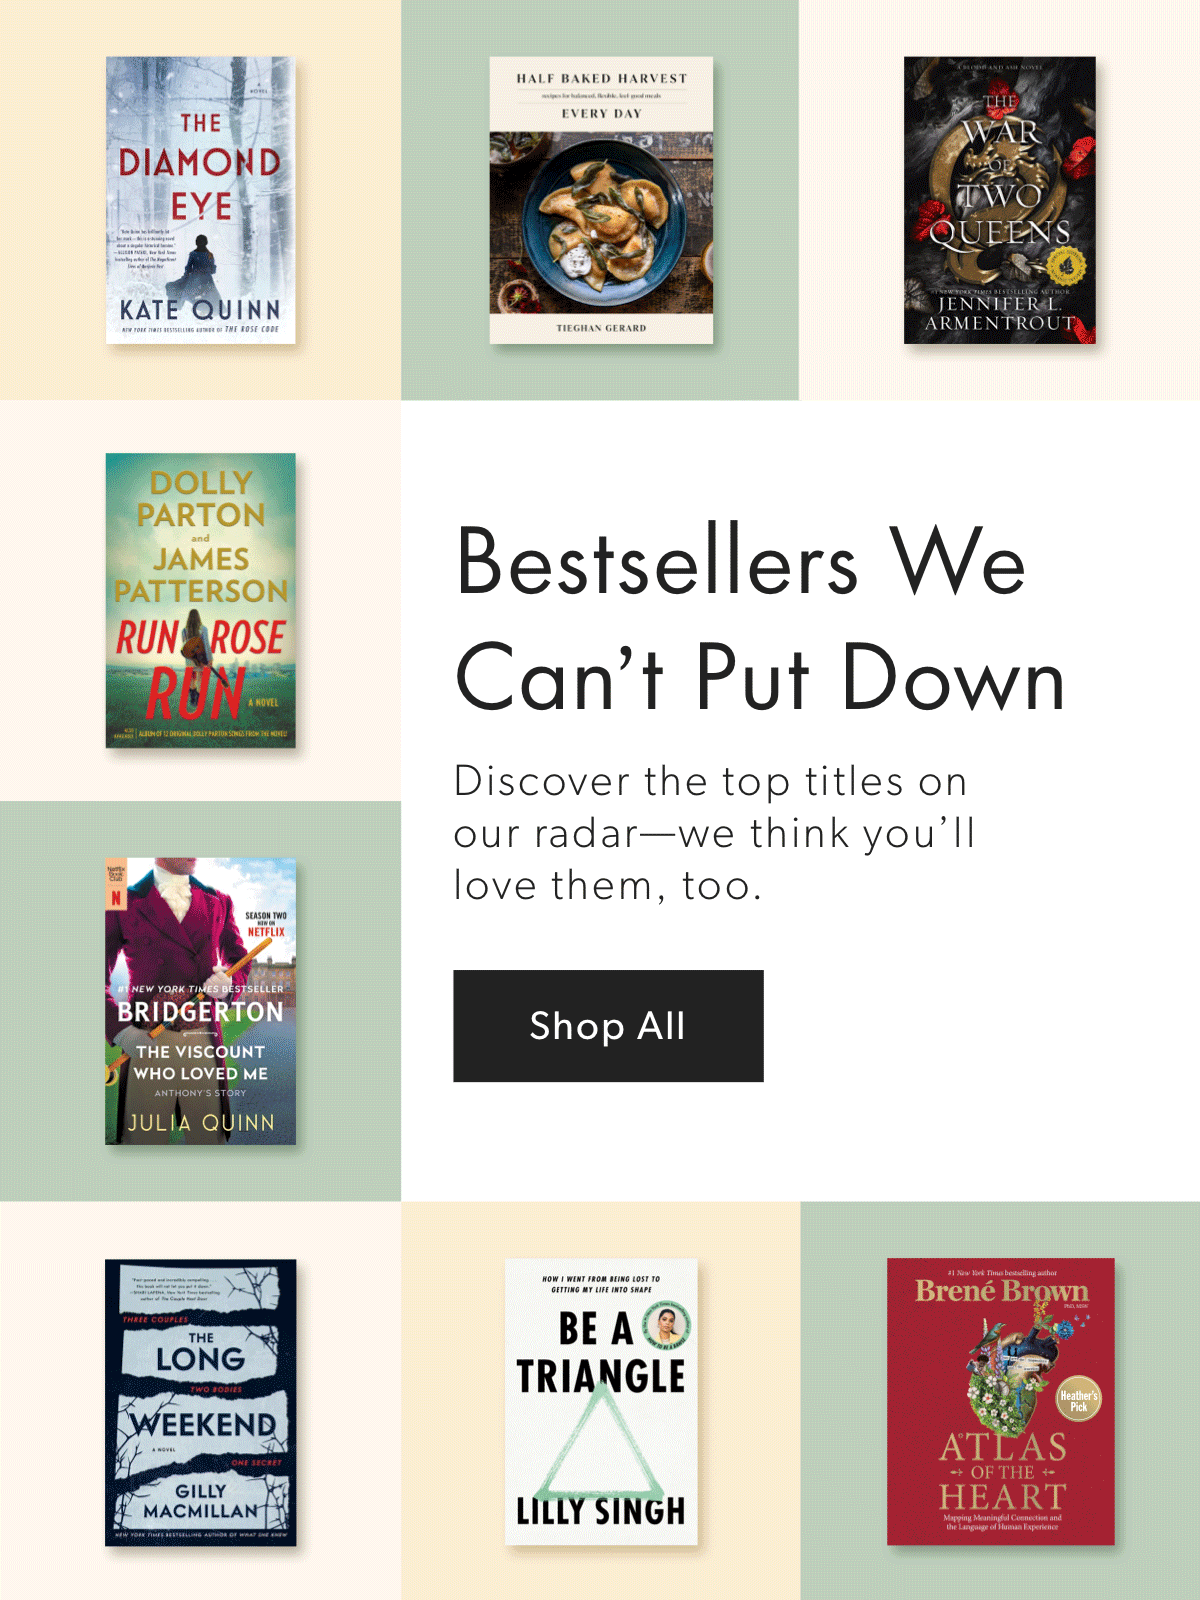 Bestsellers We Can't Put Down